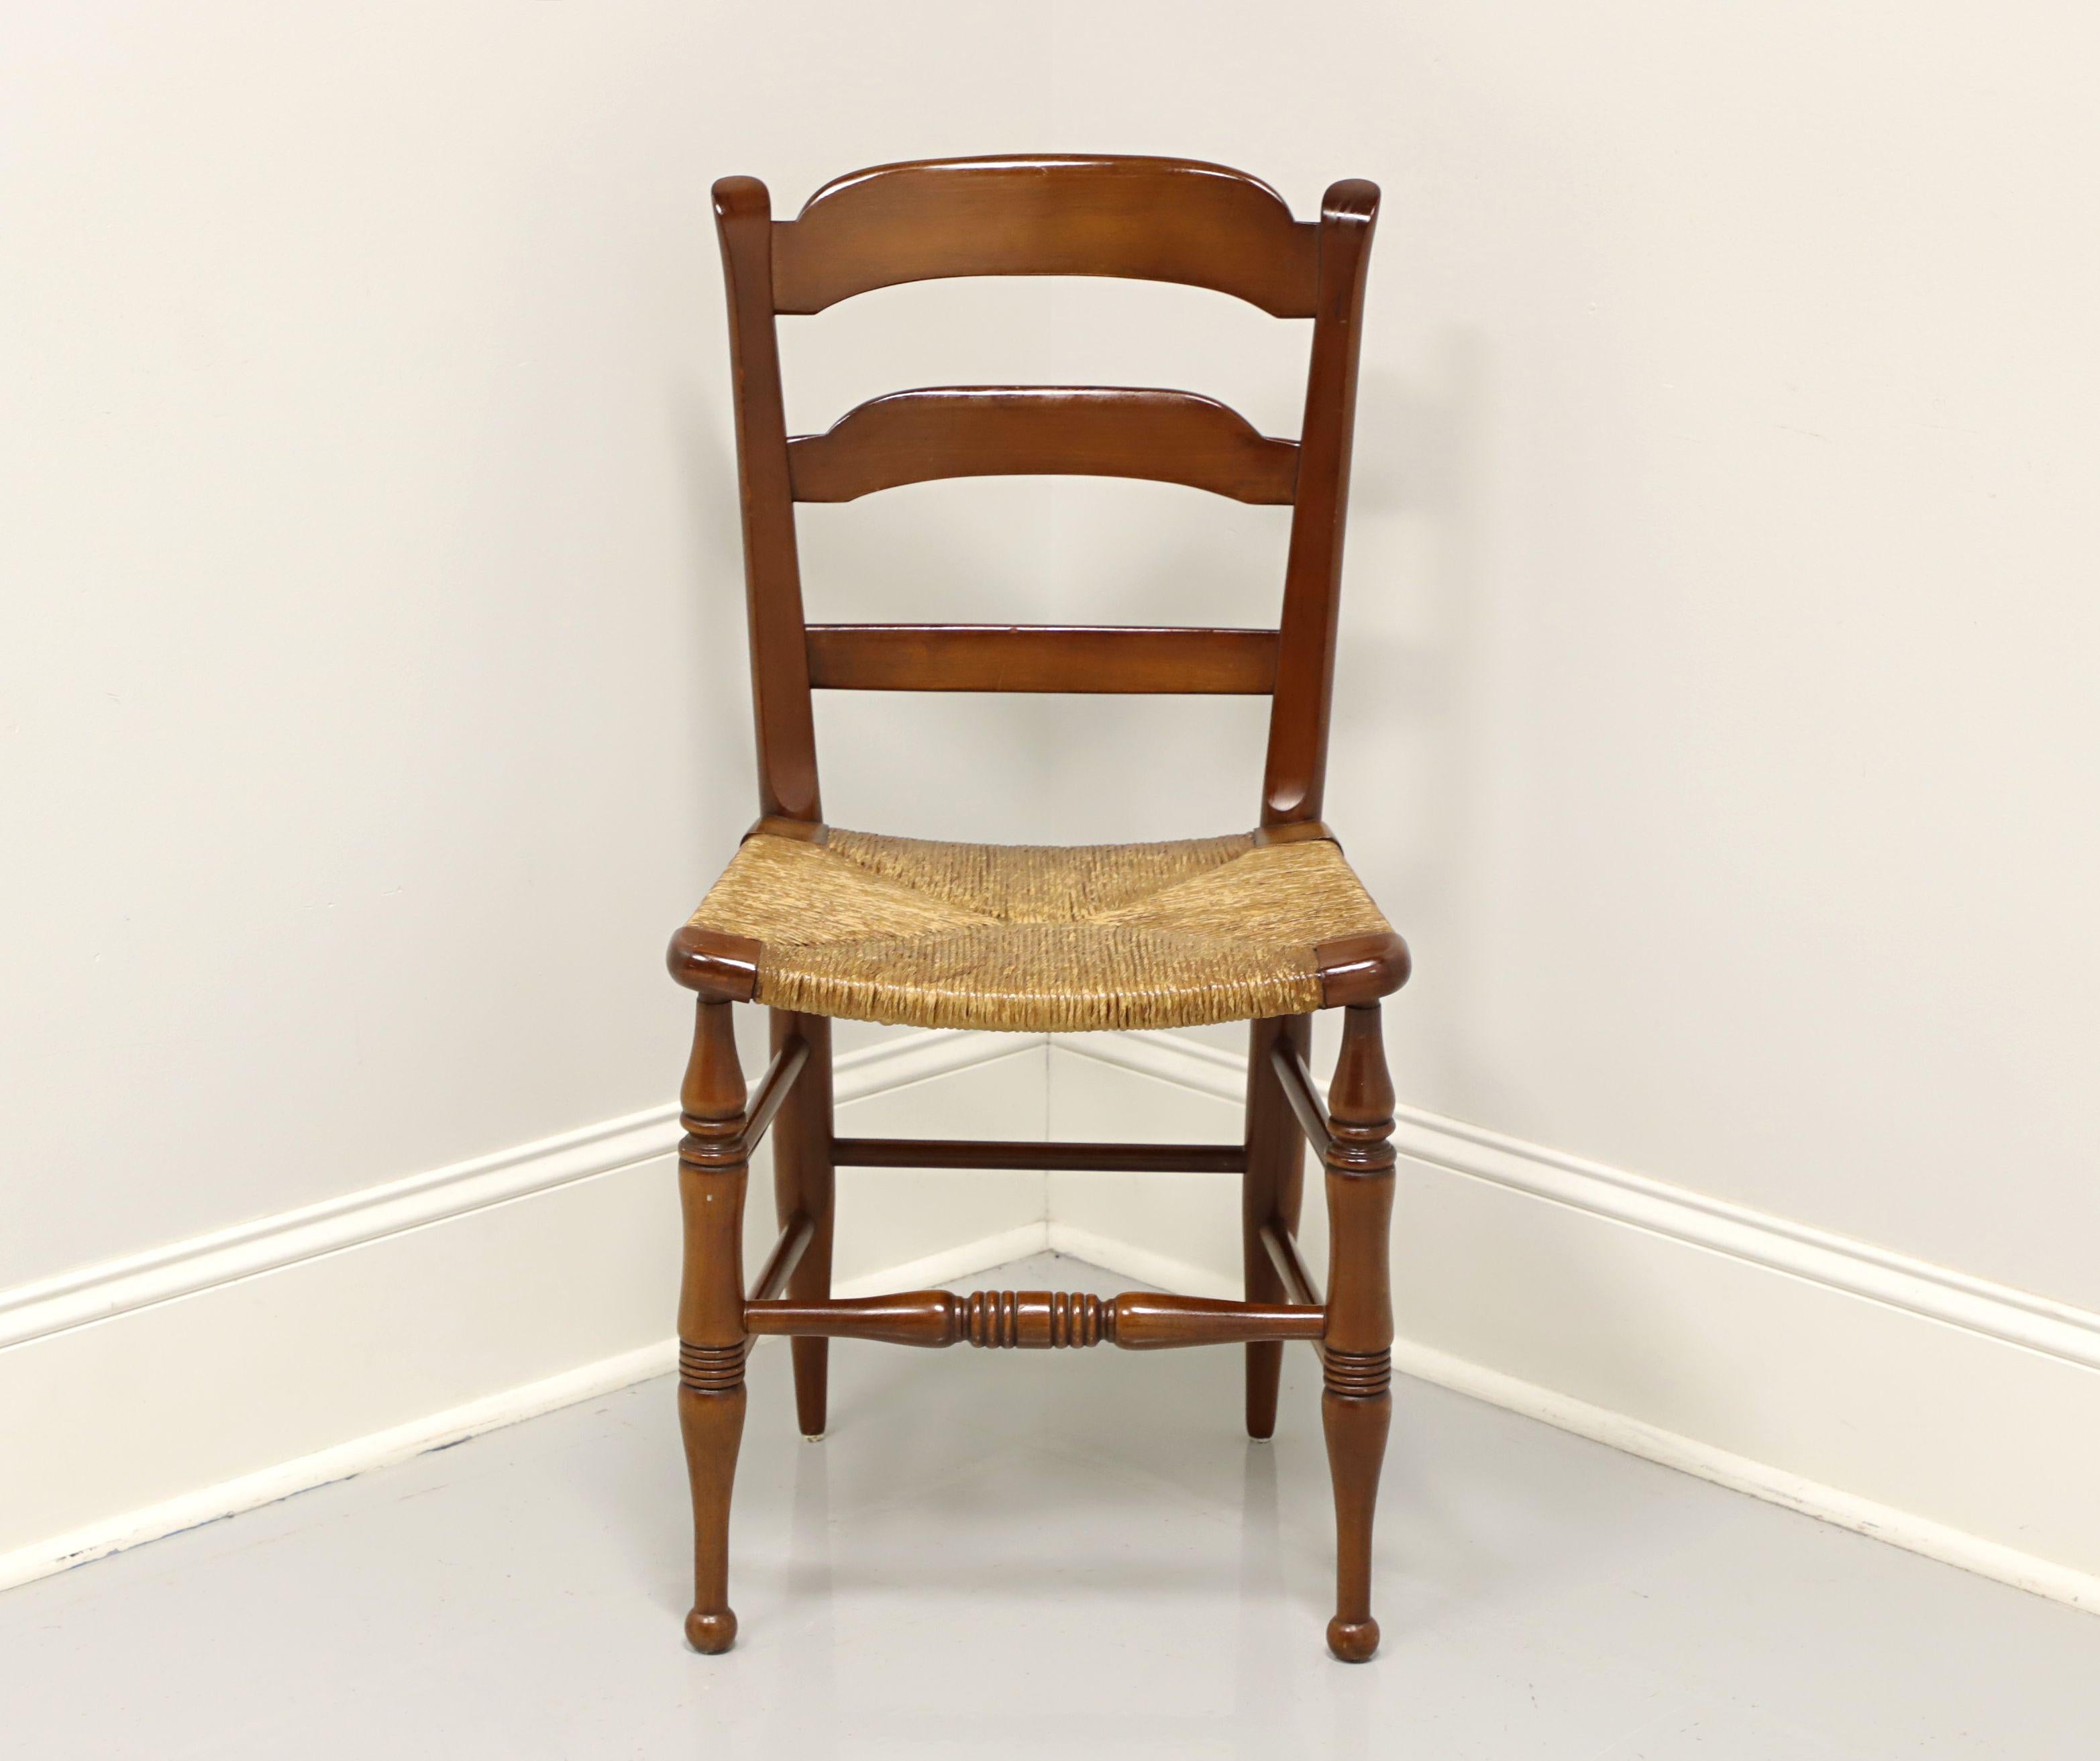 A vintage Cottage style dining side chair, unbranded. Cherry with ladder back design, rush seat, and turned legs. Made in the USA, in the mid 20th century.

Measures: Overall: 17.5W 19D 34.25H, Seat: 17.5W 14.25D 18H

Very good condition with signs